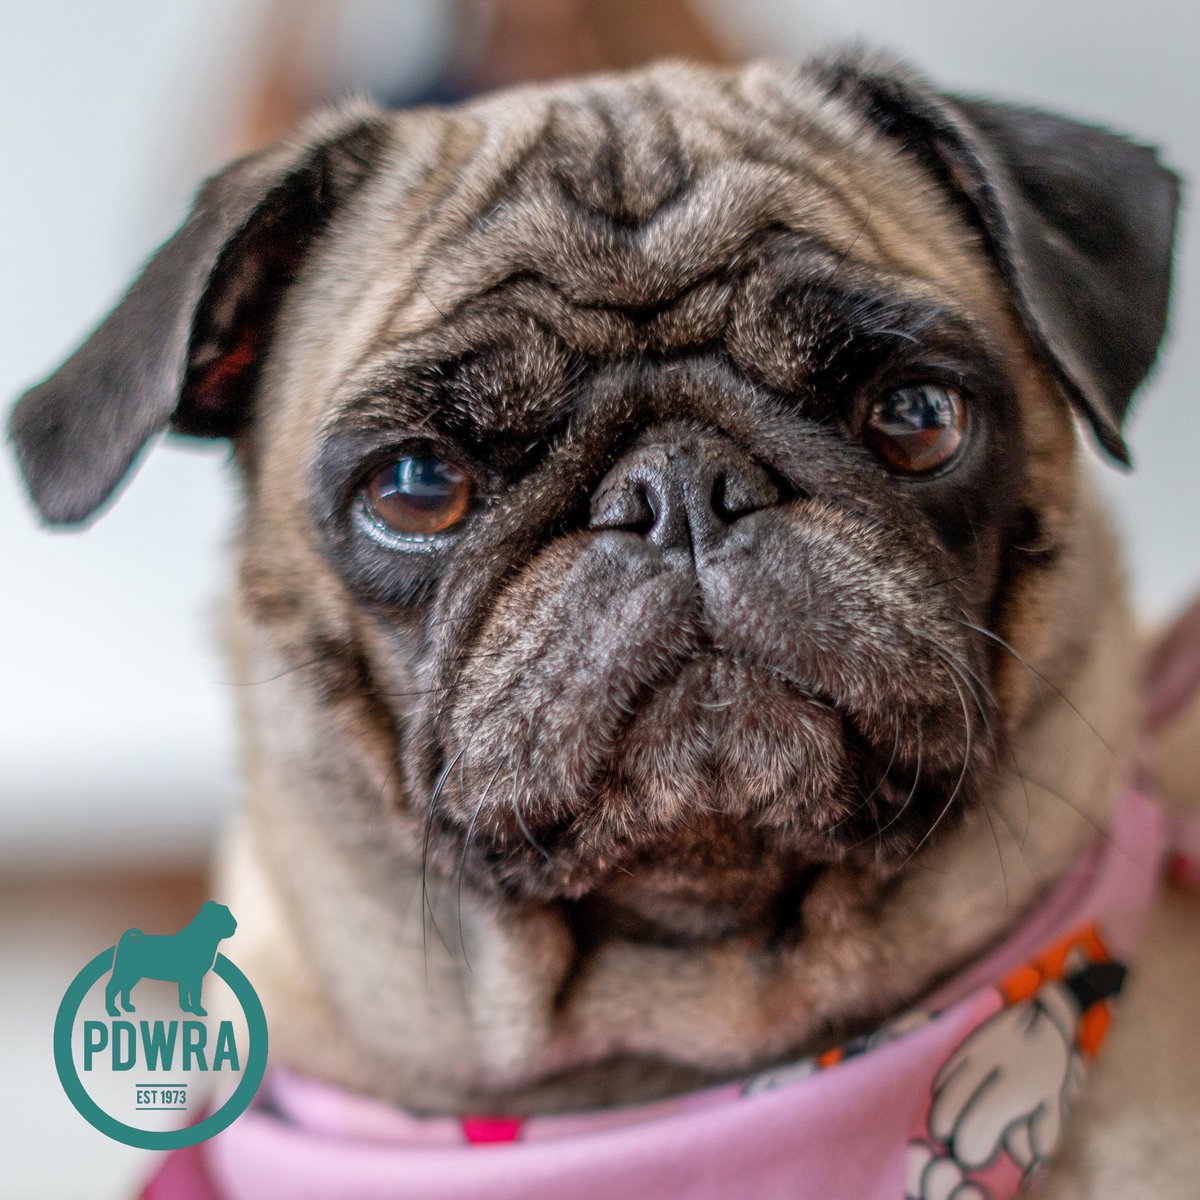 If you'd like to donate to the PDWRA, however large or small, just visit our website where you’ll find all the info on the various ways you can help. Thankyou! – ecs.page.link/NqPCS #pdwra #pugwelfare #fundraising #pugcharity #pugsinneed #pugrescue #friendsofwelfare #pug